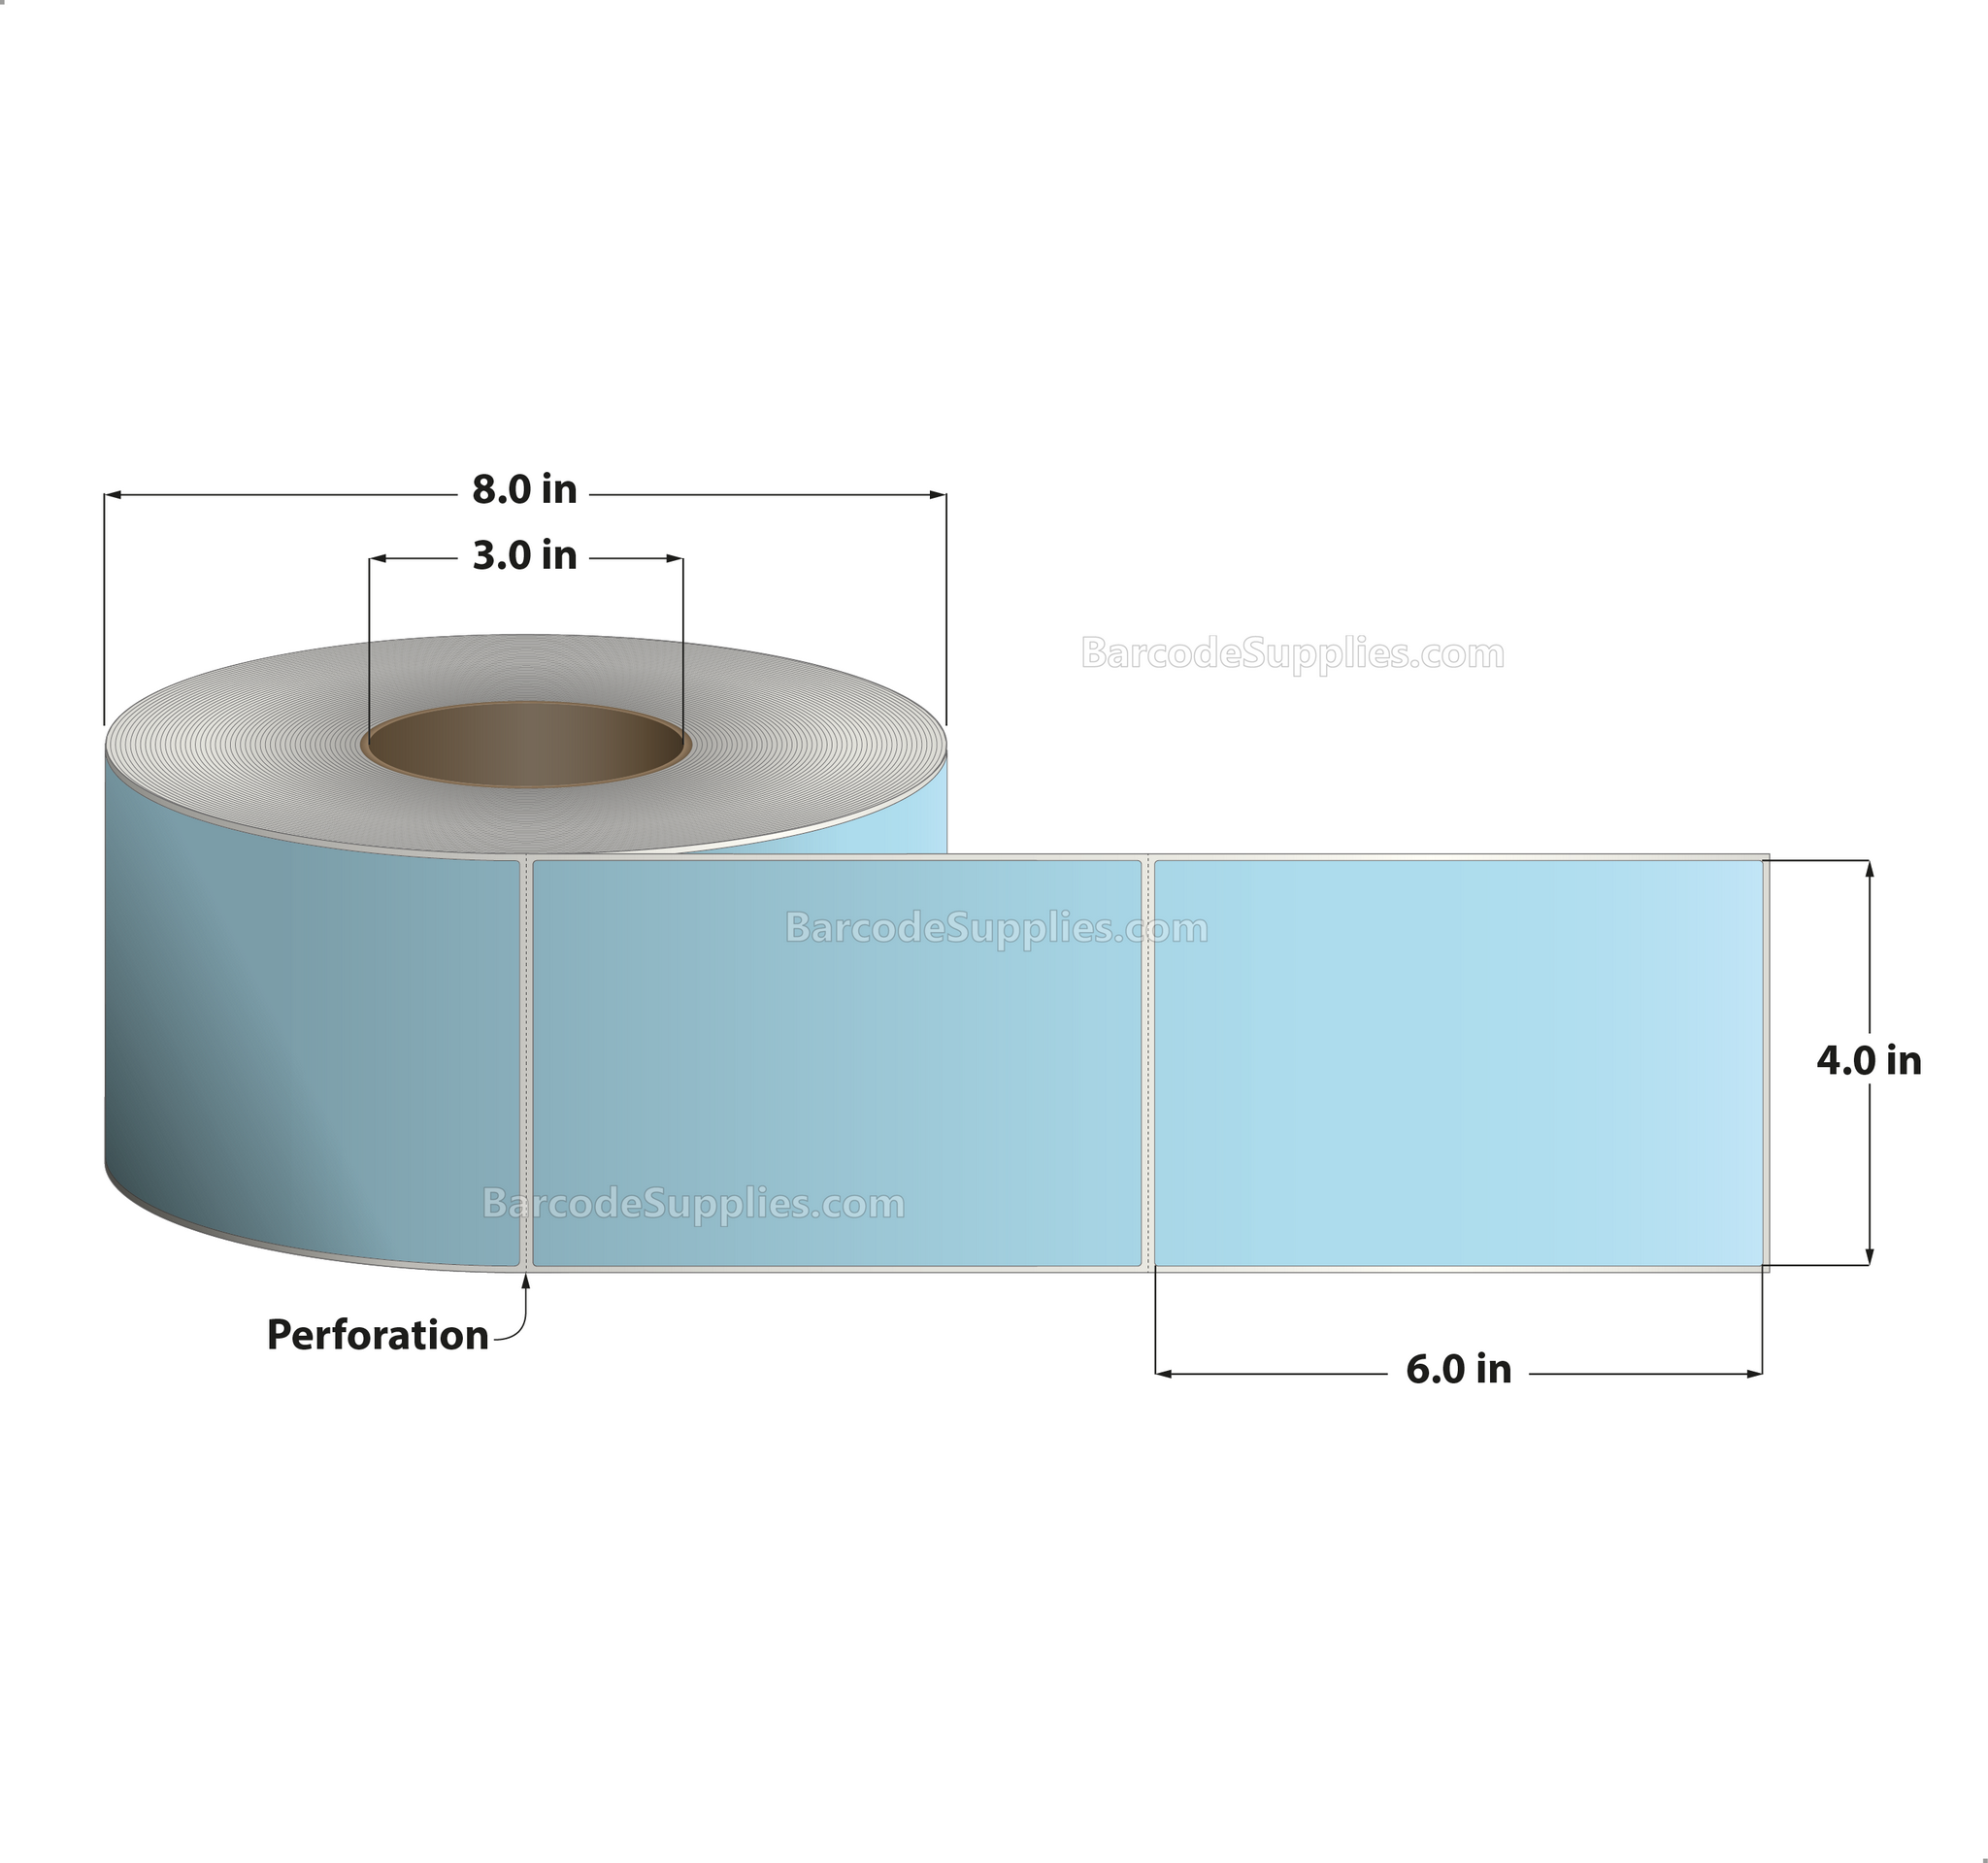 4 x 6 Direct Thermal 2975 Blue Labels With Permanent Acrylic Adhesive - Perforated - 1000 Labels Per Roll - Carton Of 4 Rolls - 4000 Labels Total - MPN: DT46-1PBL